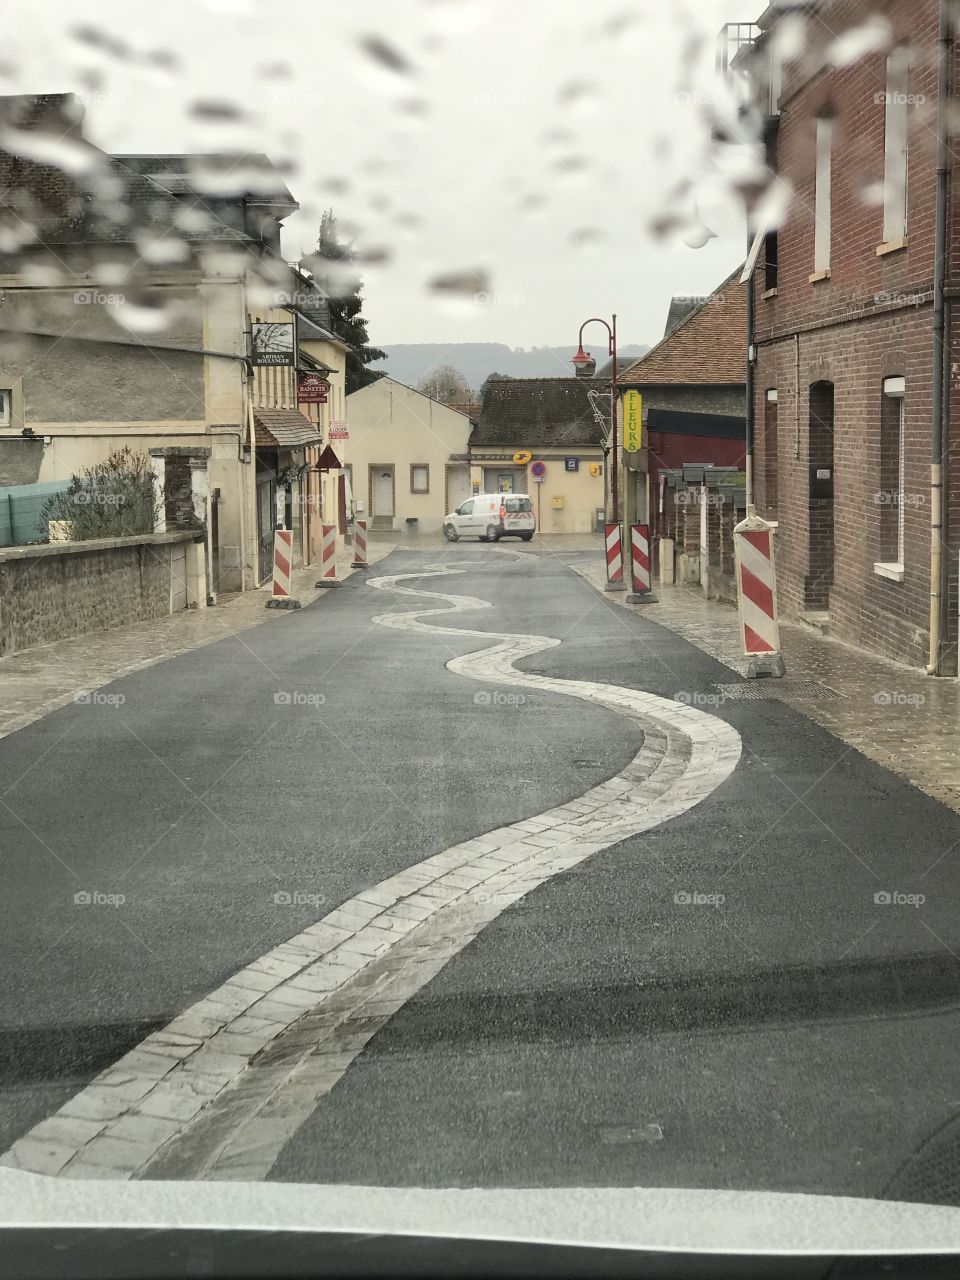 On the road in Normandy, France 